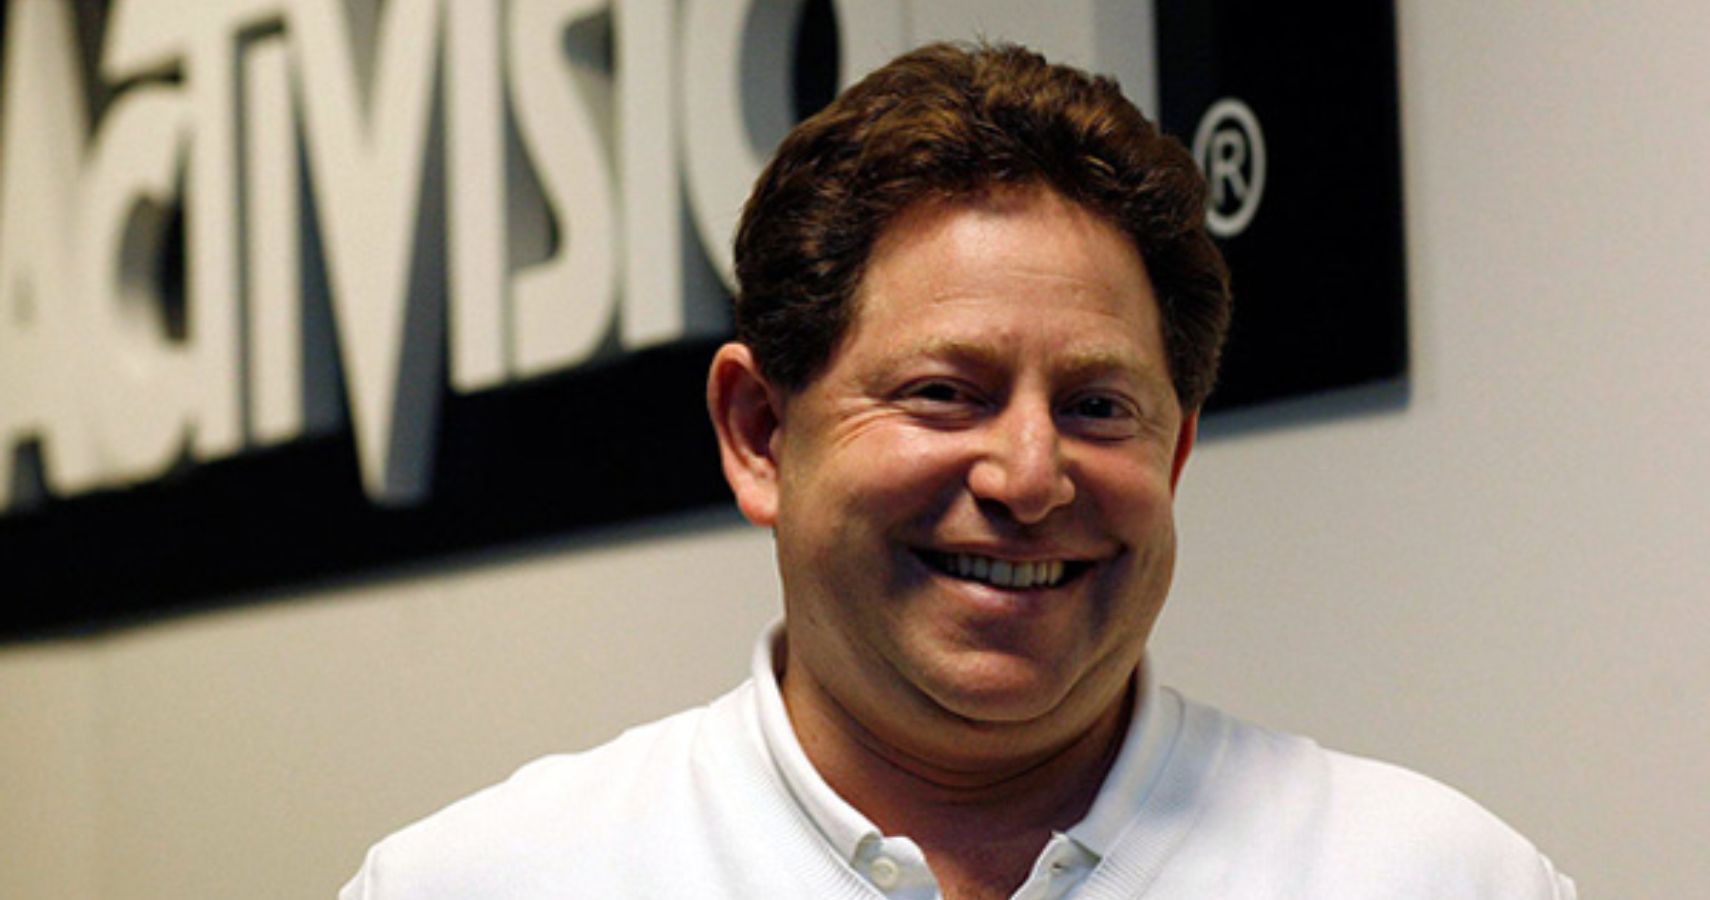 Activision Gives Bobby Kotick Too Many Bonuses, Alleges Investment Group